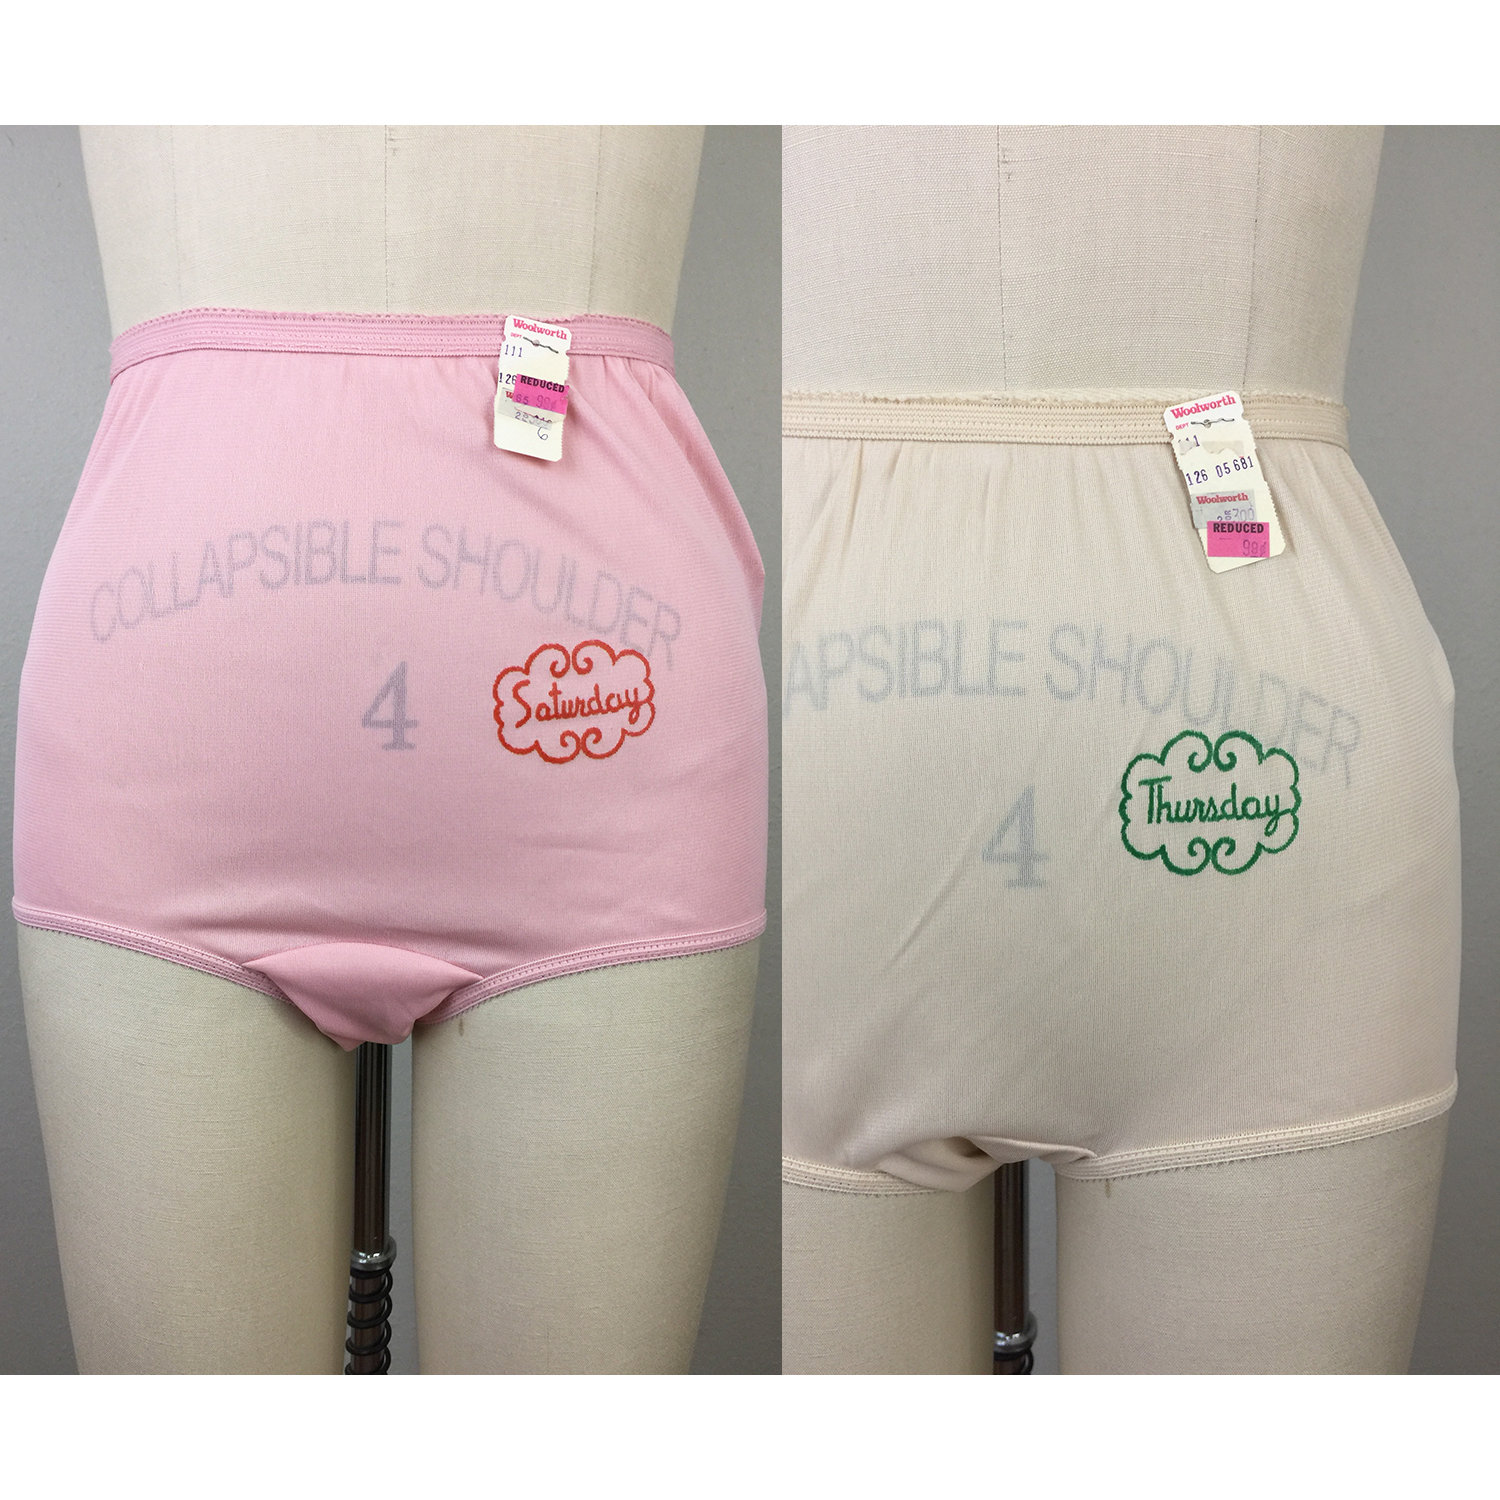 Vintage 60s Days of the Week Underpants Panties Thursday Saturday Pink &  Nude 1960s DEADSTOCK Lingerie 6/M 